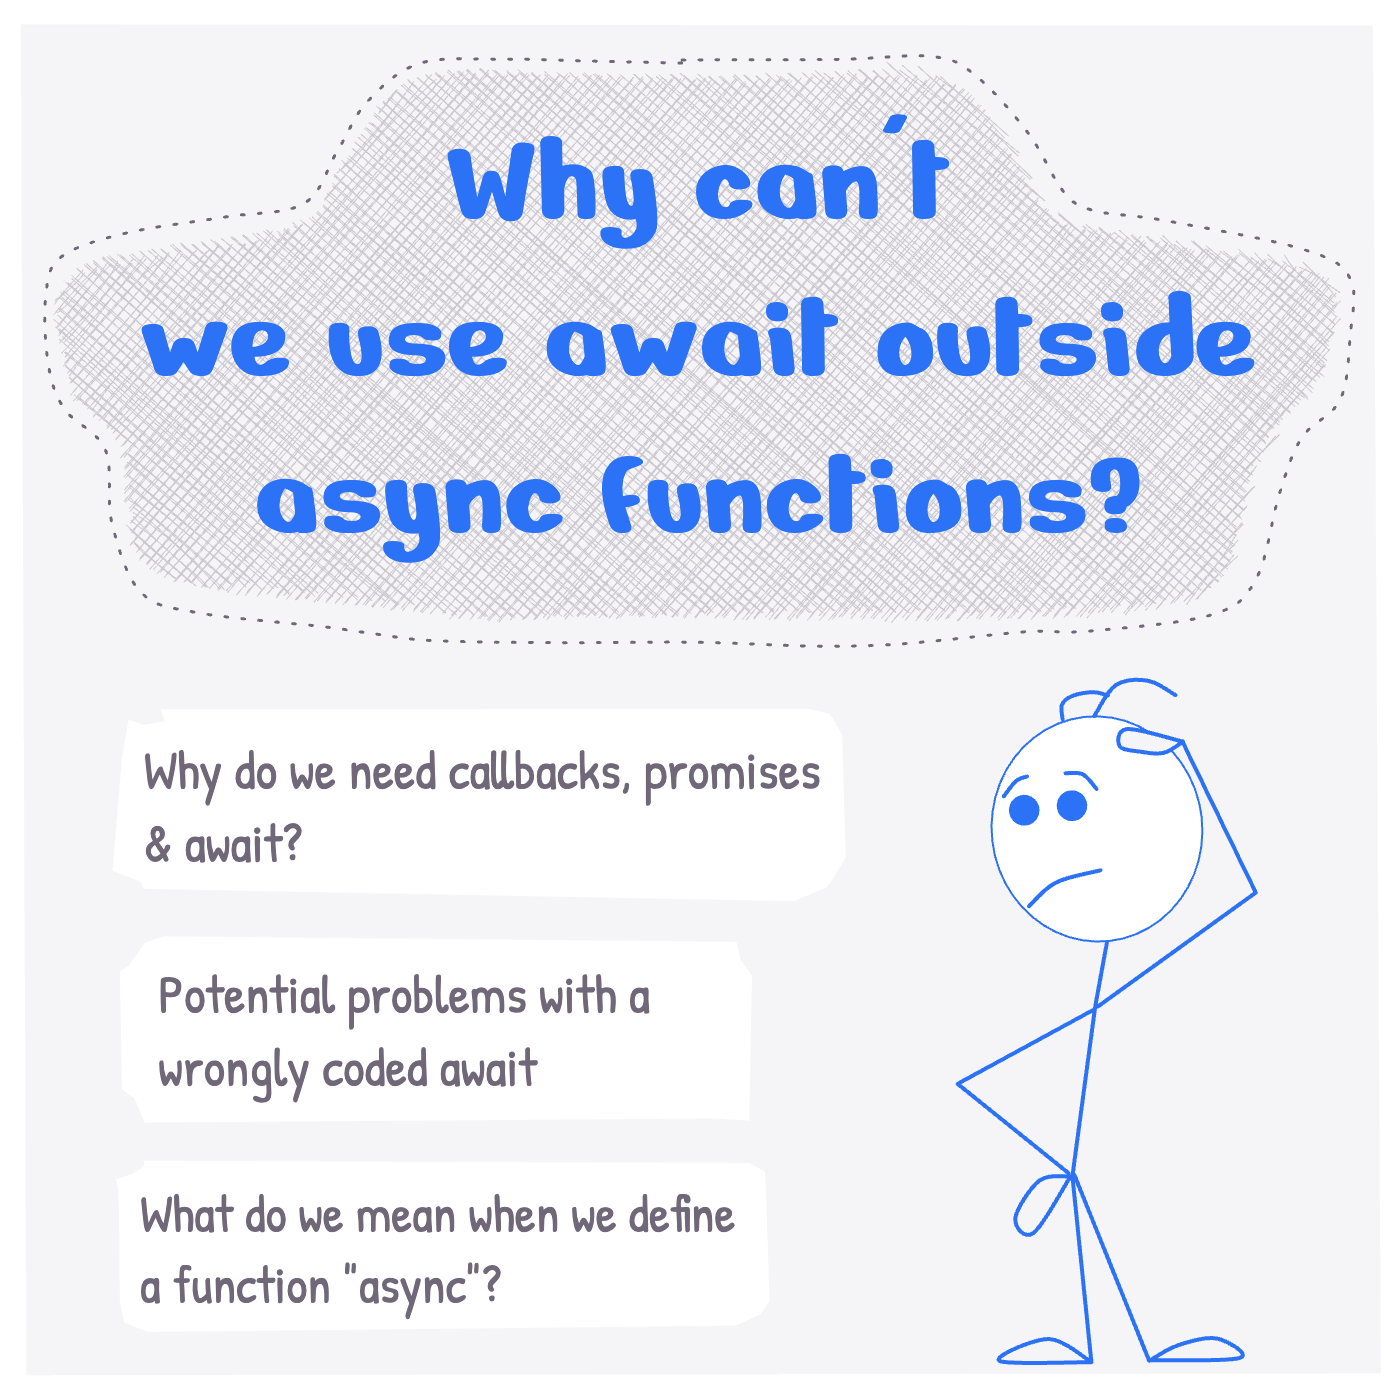 Why can't we use await outside async functions? Why do we need callbacks, promises and await? What are the potential problems with a wrongly coded await? What do we mean when we define a function 'async'?